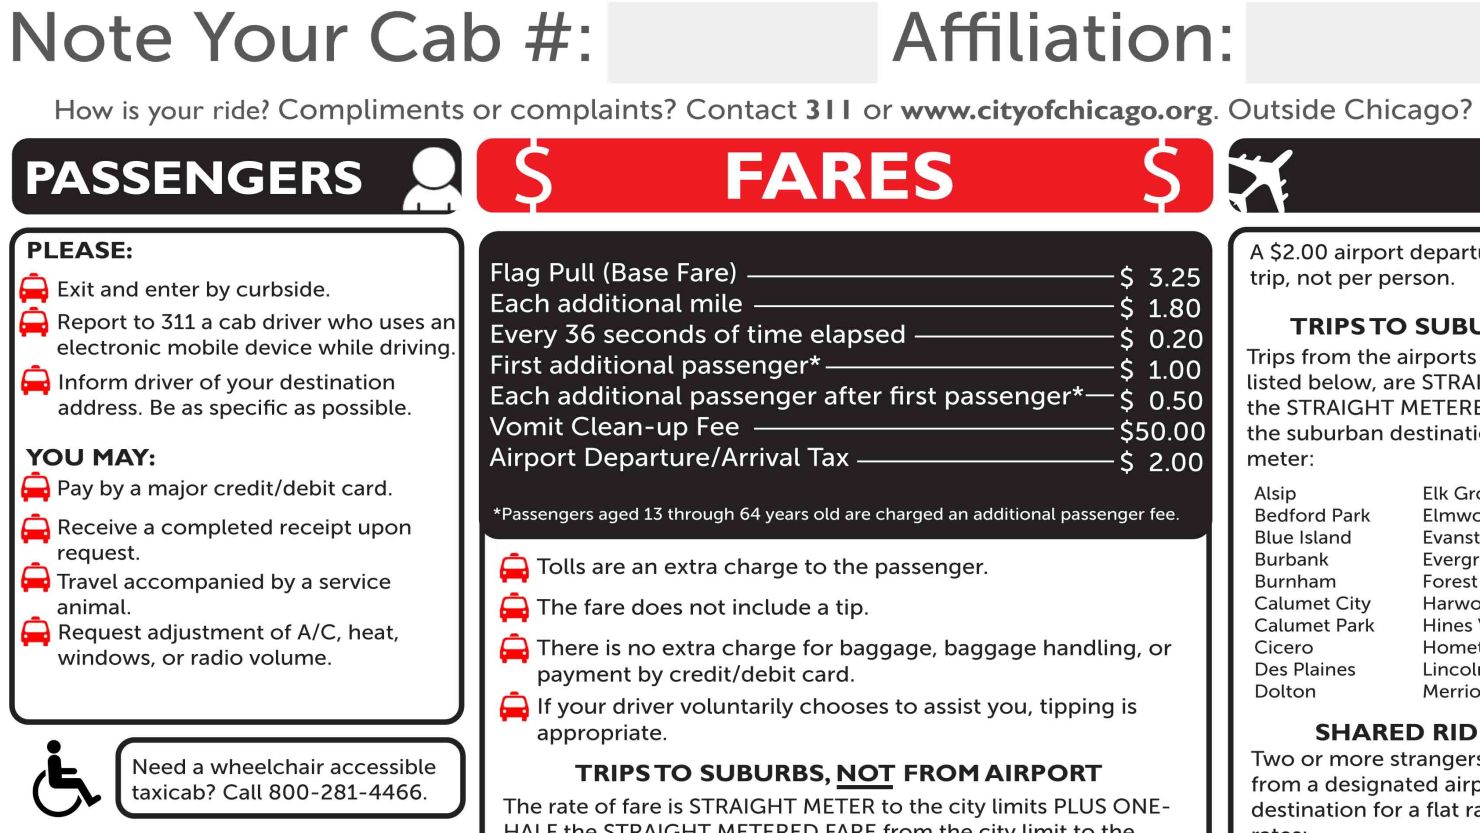 The placard shows new rules for Chicago cabs. 